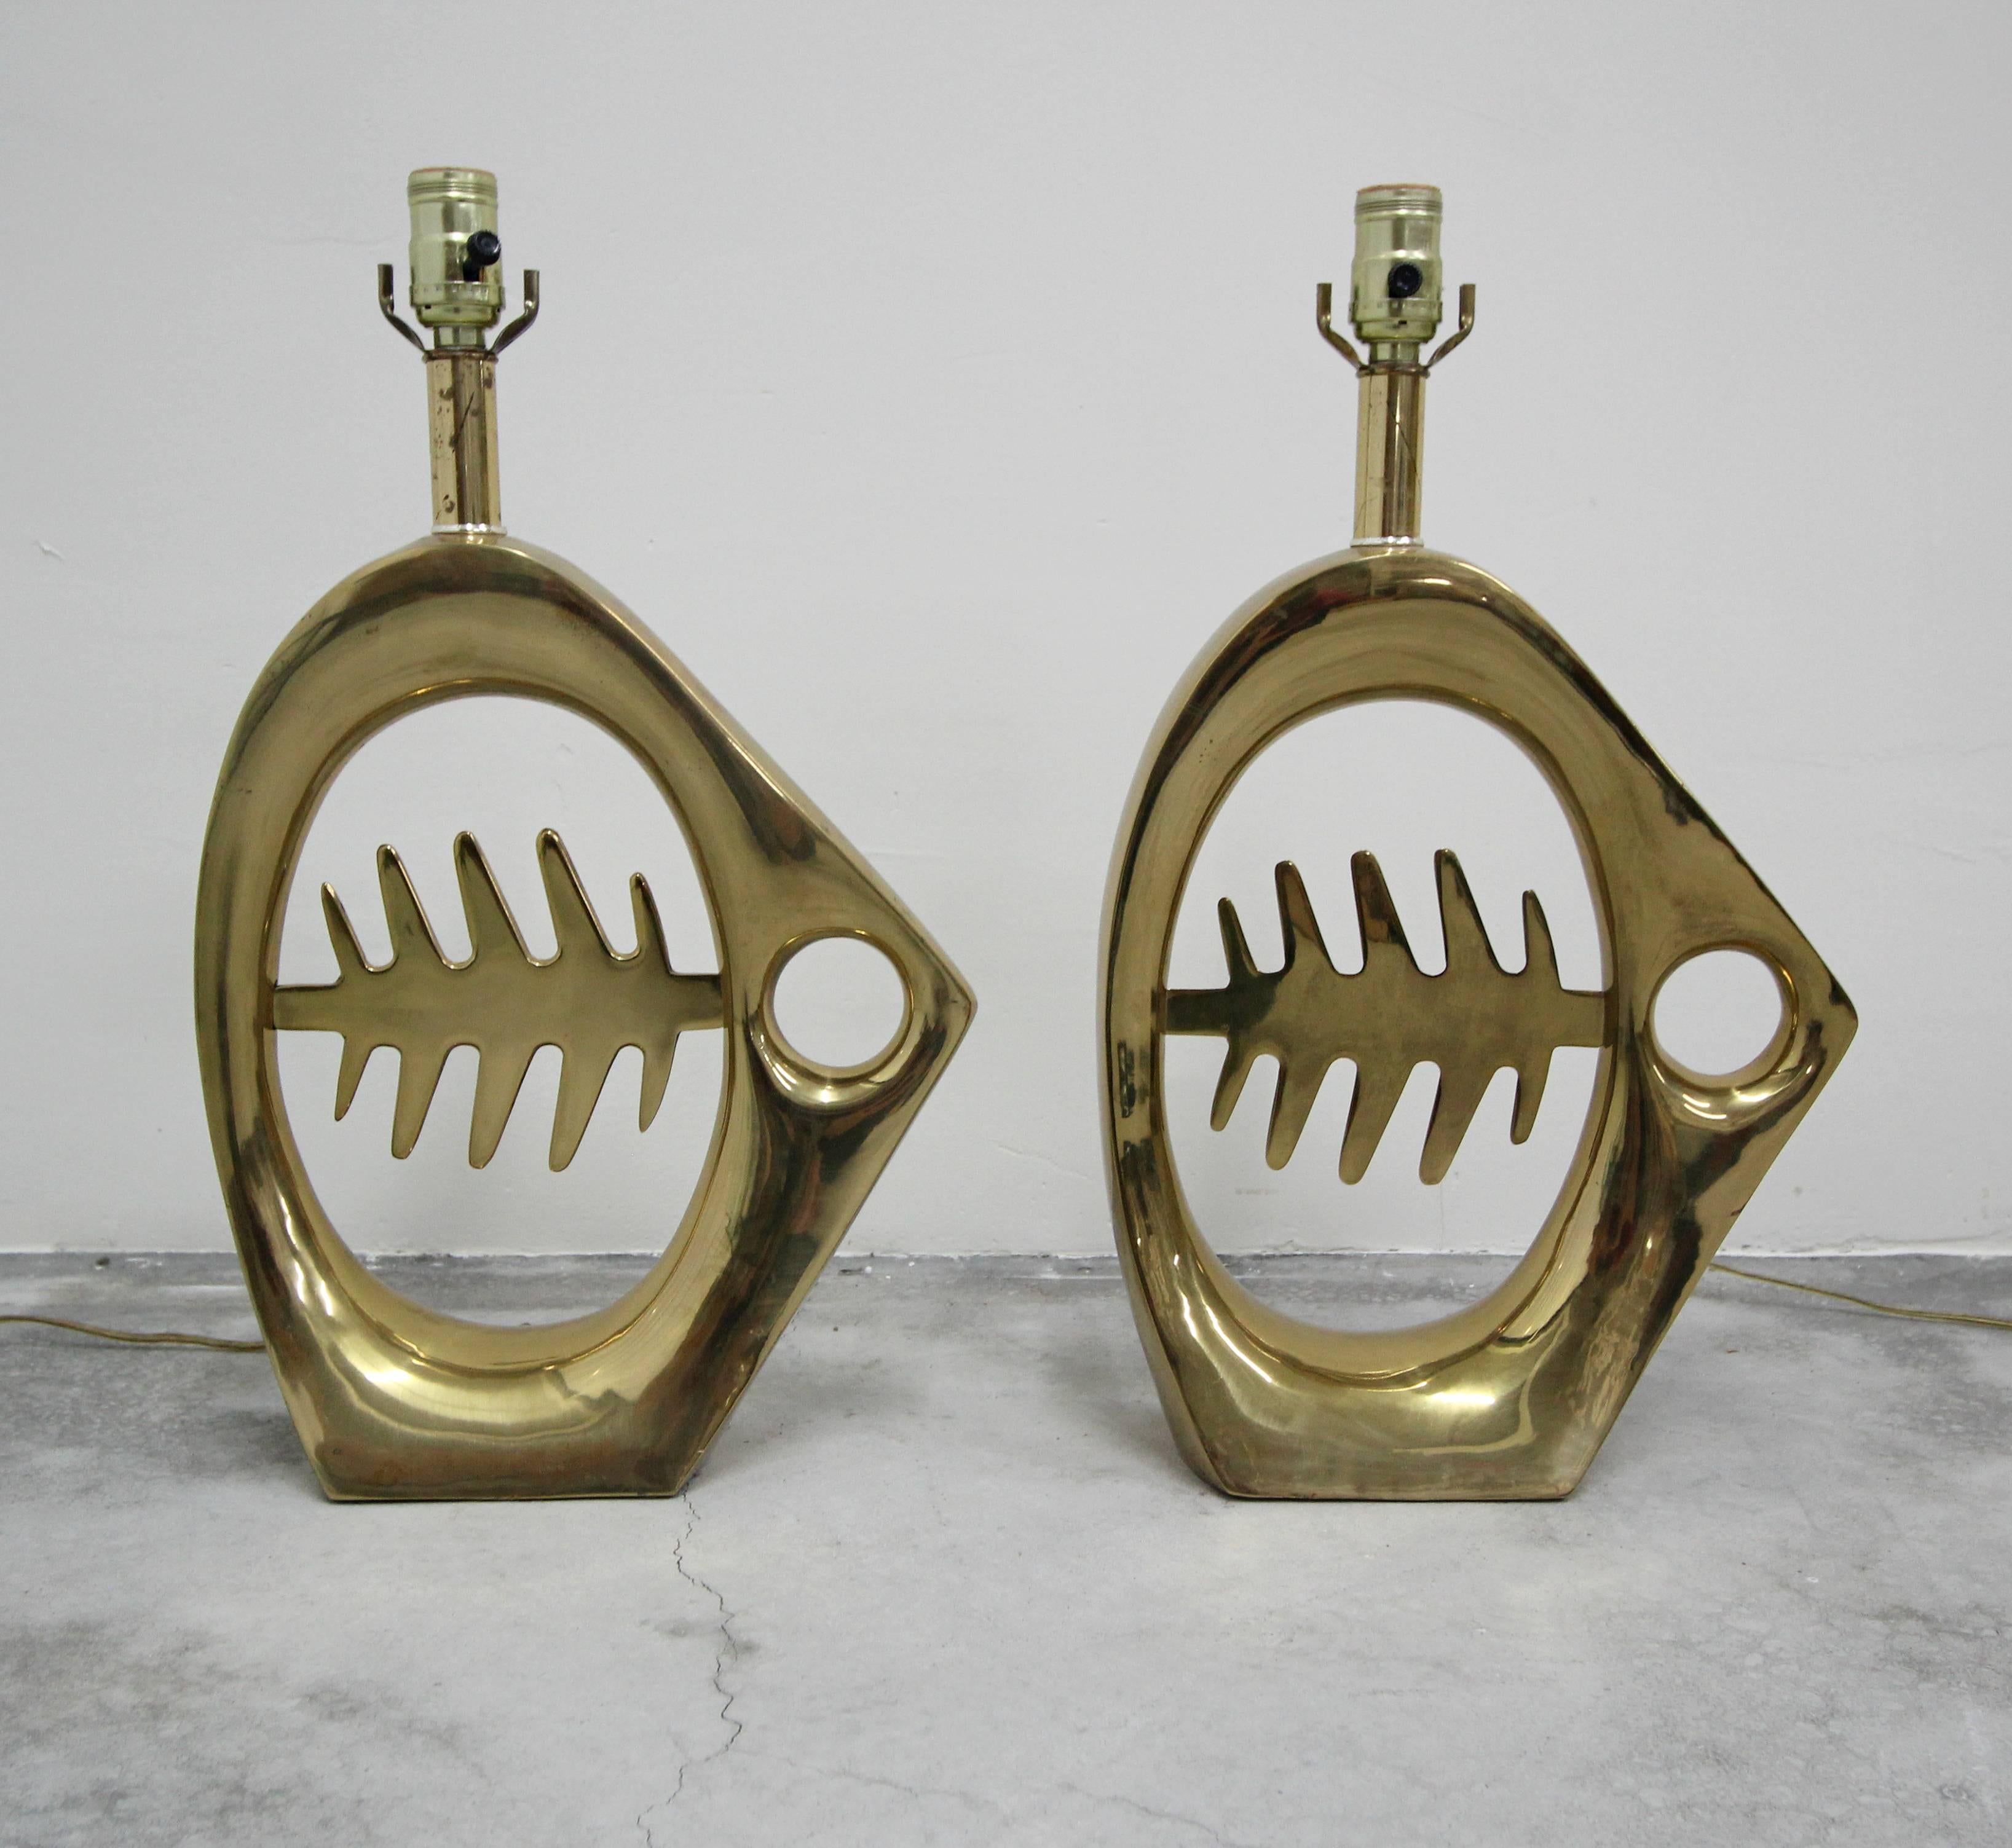 Stunning pair of midcentury Italian solid brass sculptural fish lamps. Clean modernist style.

Some age appropriate patina, but could easily be polished back to their original glory.

Lamp are in working condition however, we assume that the